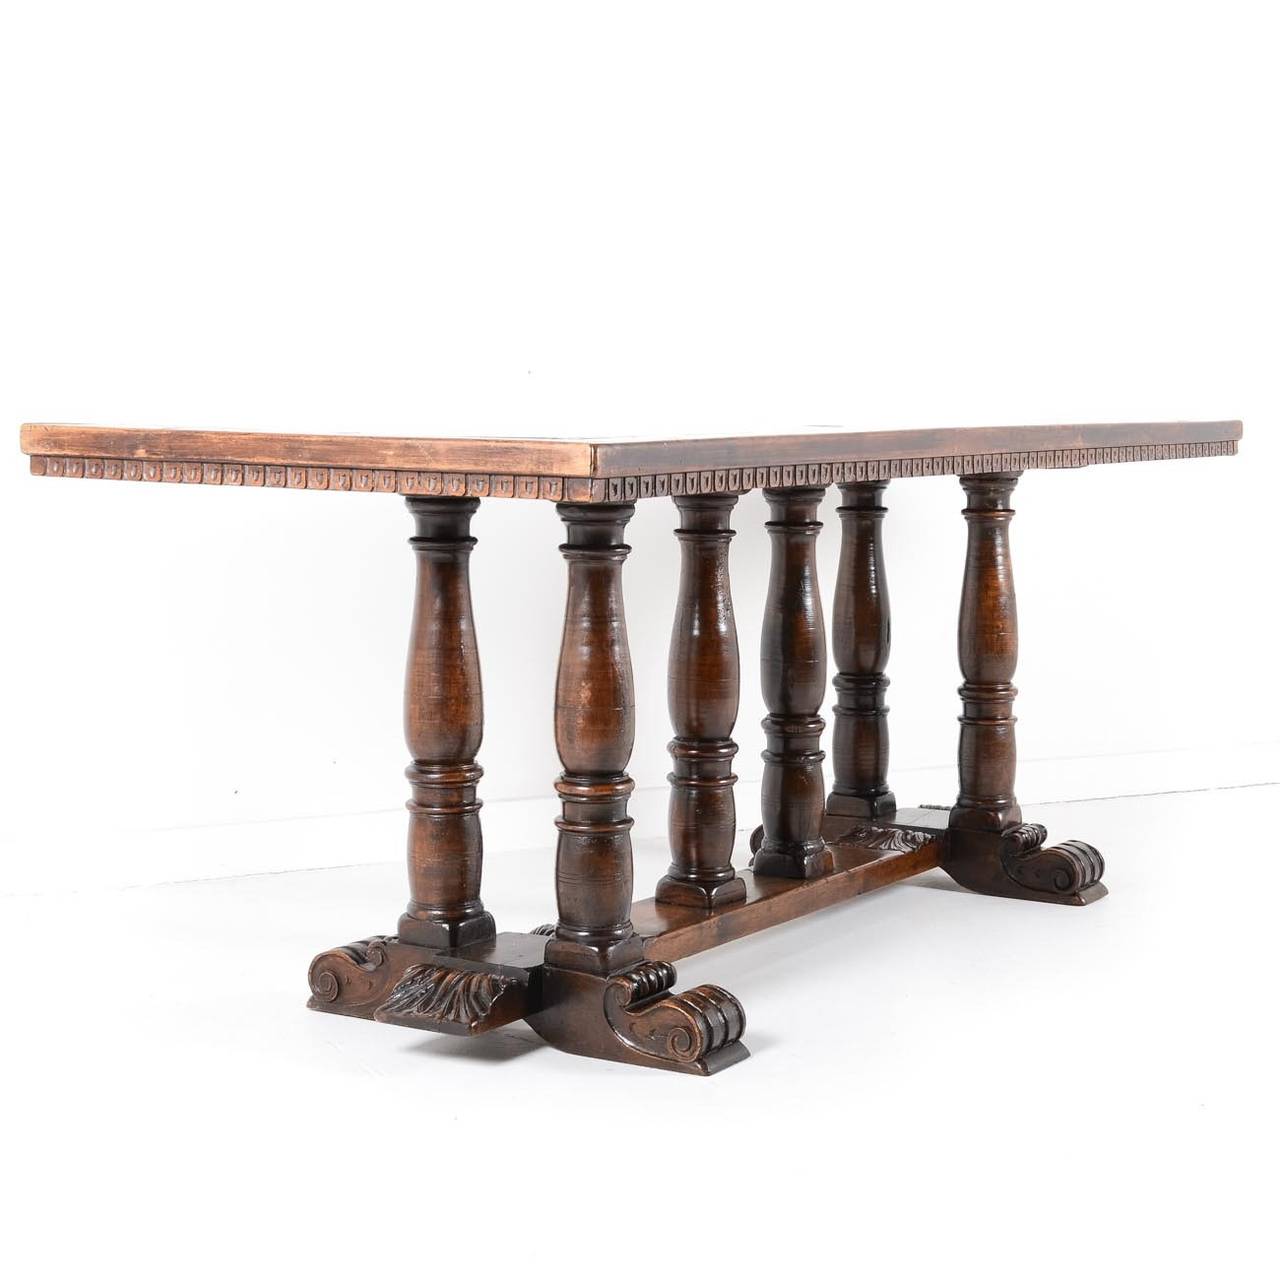 Antique French trestle farm table with six turned legs on carved base. Wonderfully detailed, great patina consistent with age and use. Note the small bow typical of a table of this era.